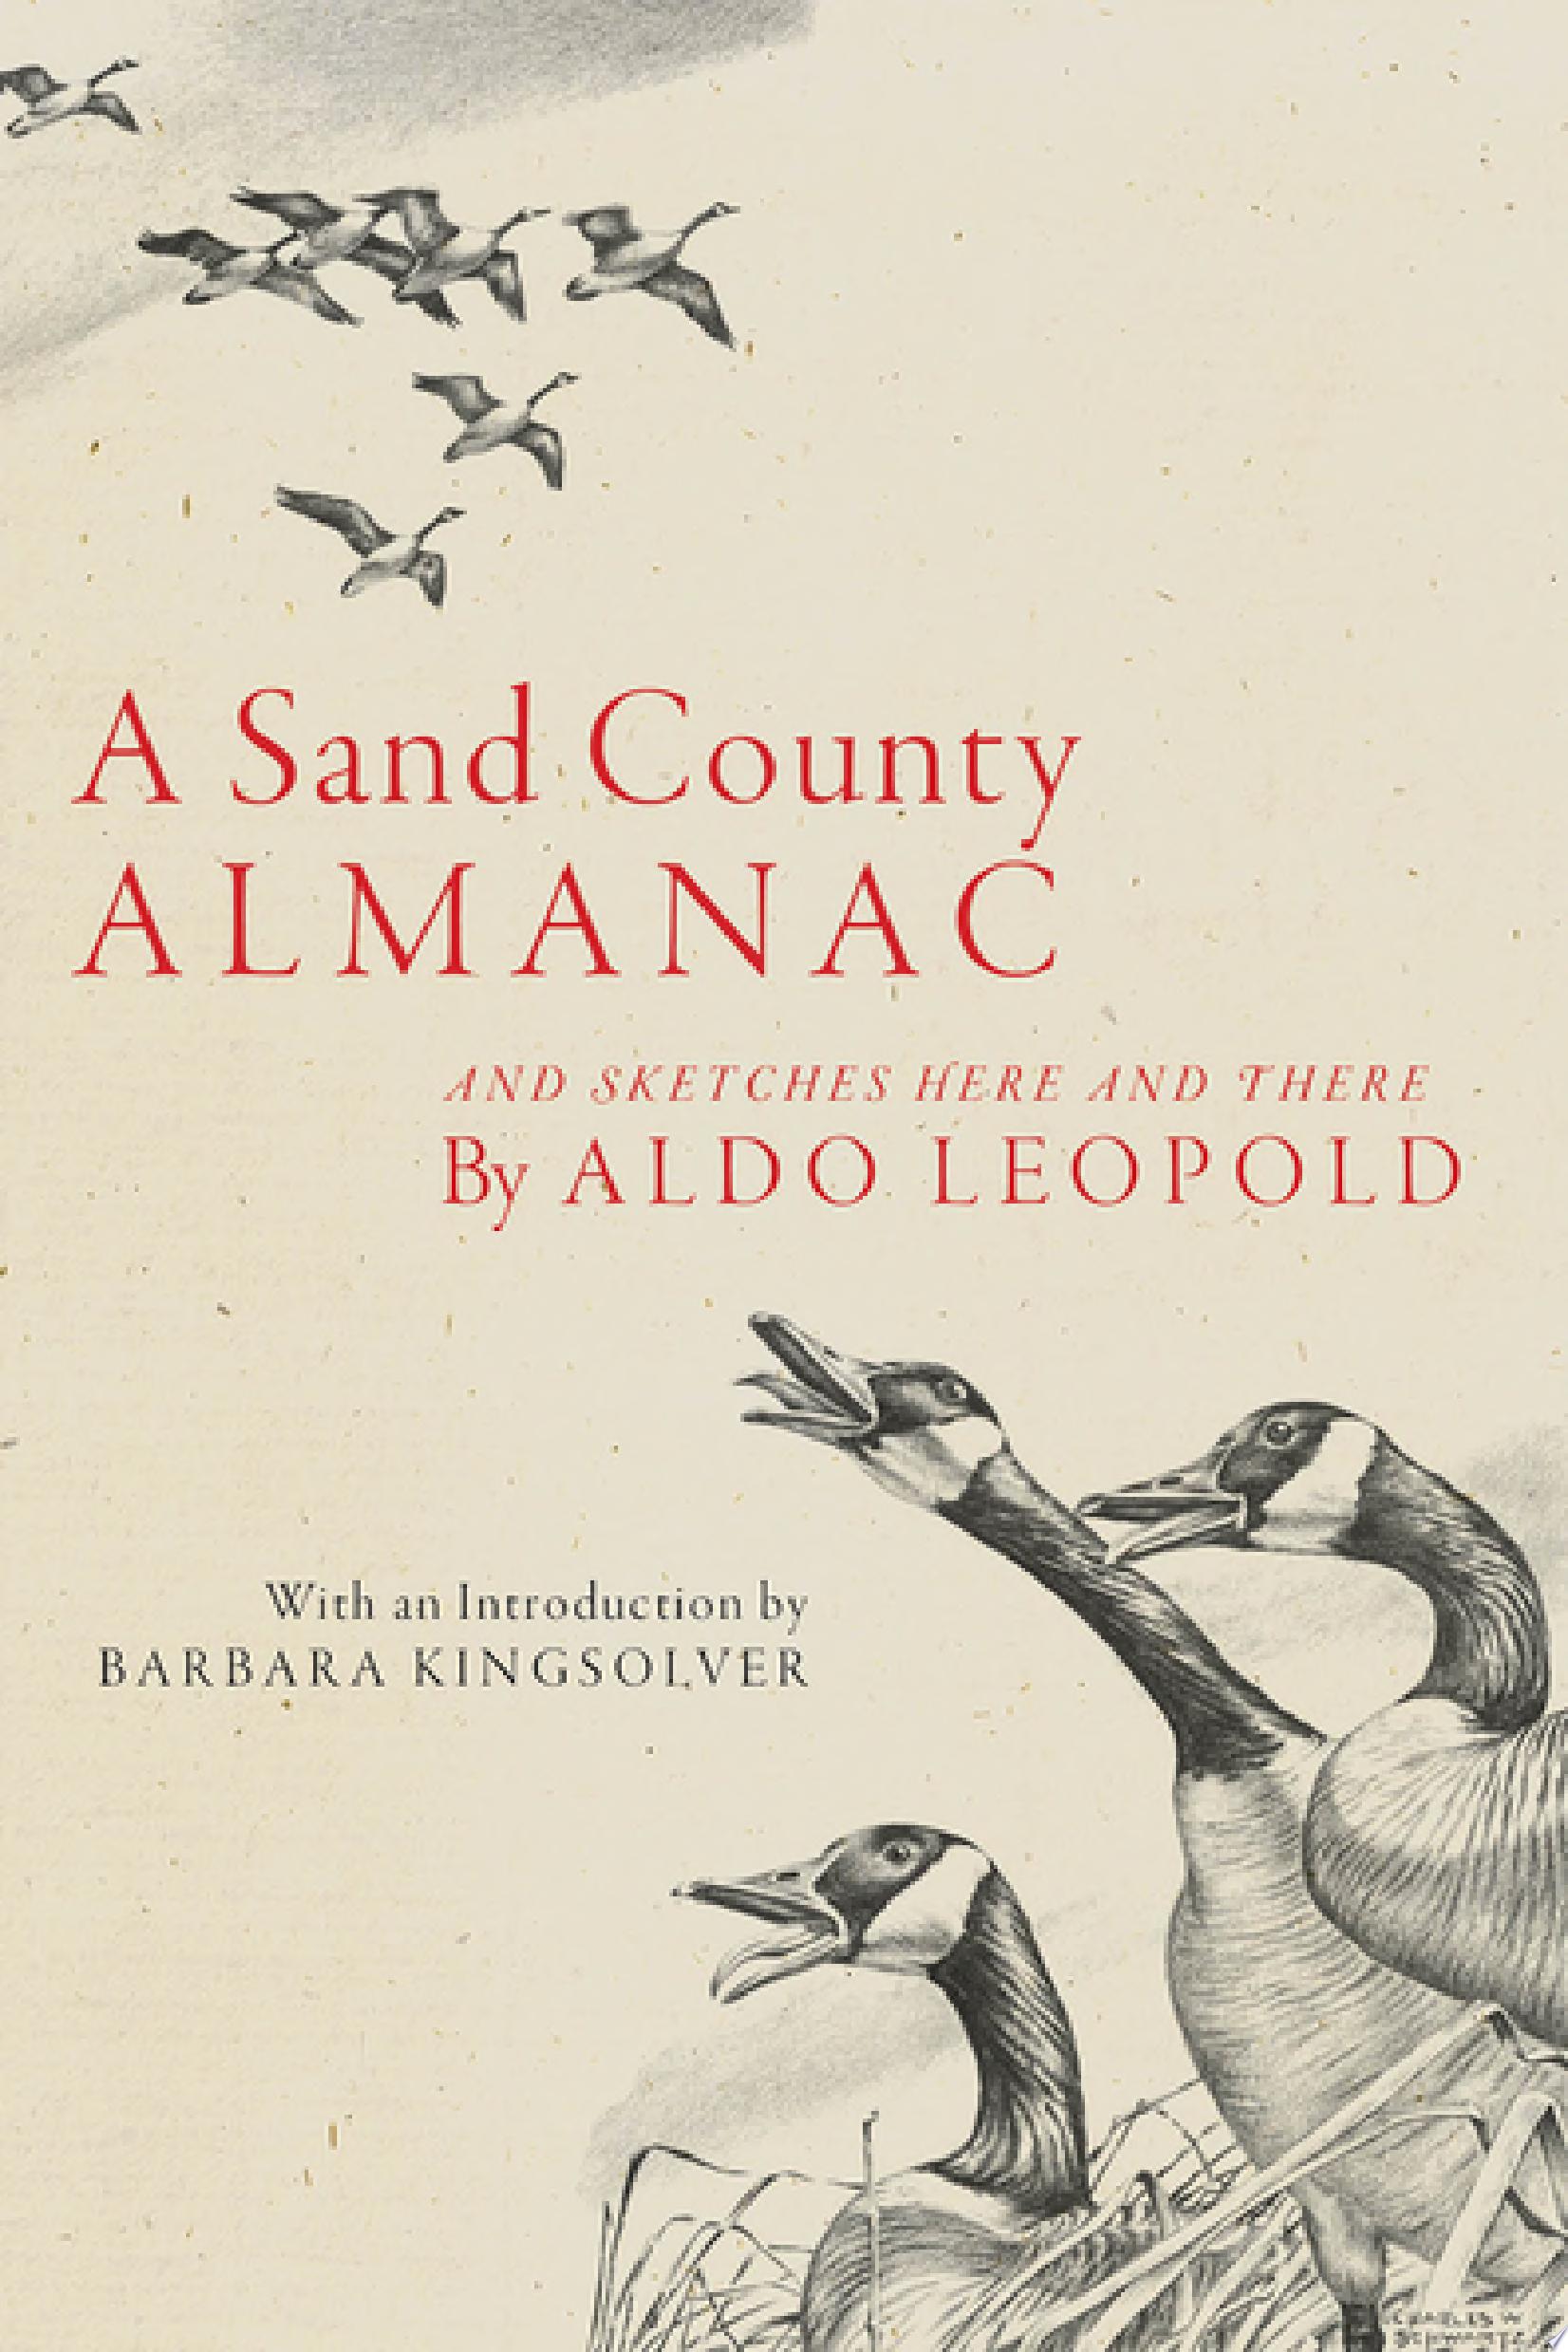 Image for "A Sand County Almanac"